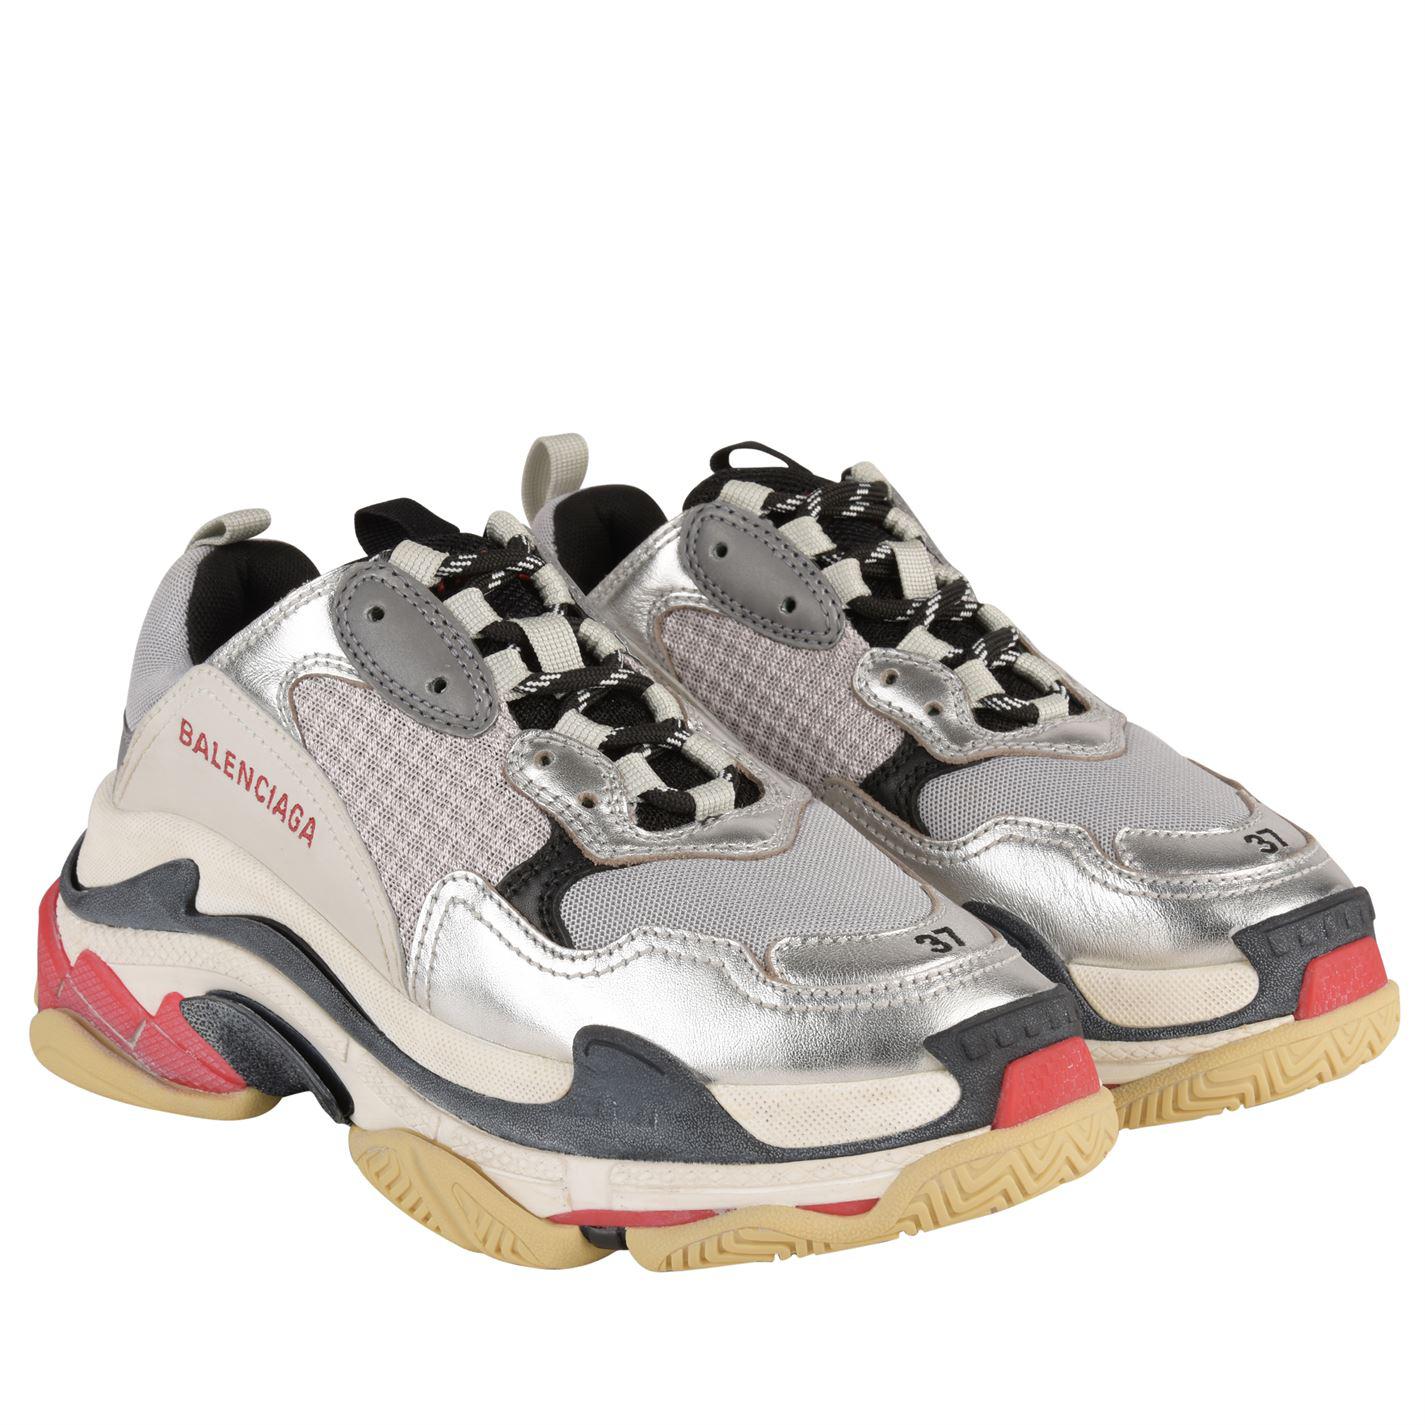 Balenciaga Synthetic Triple S Trainers in White Navy White